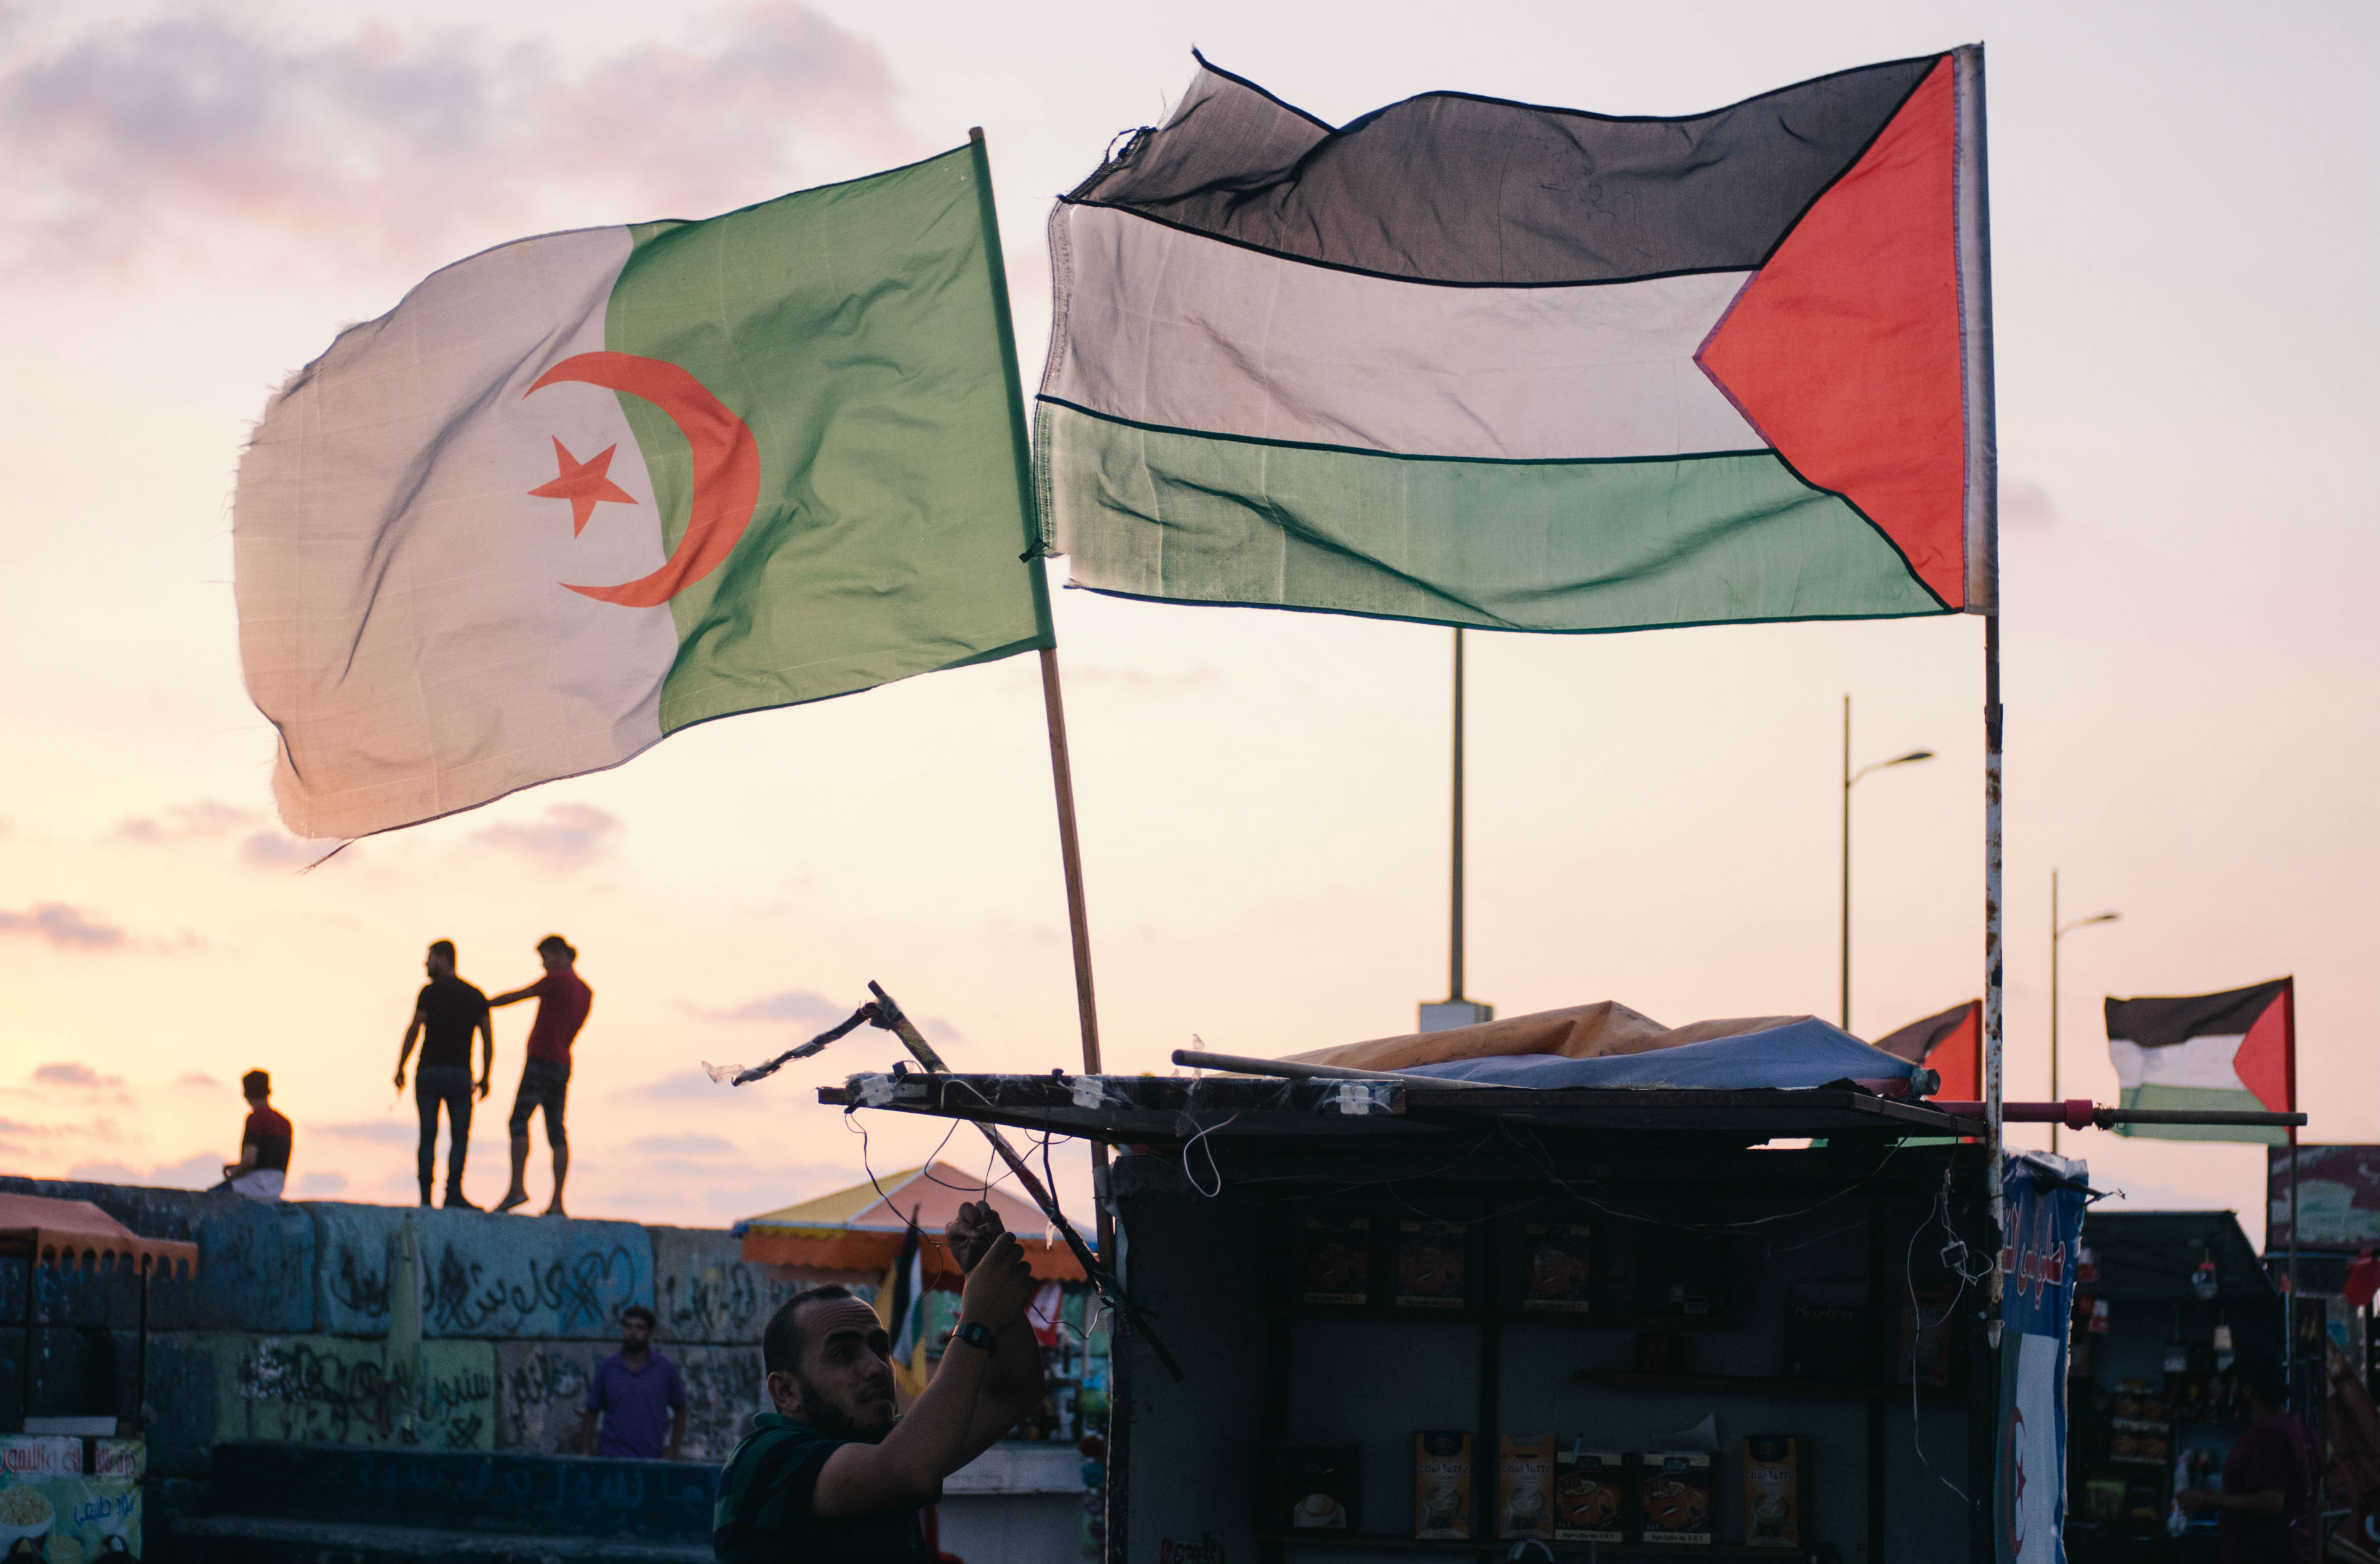 A vendor sets up his coffee stall decorated with the Algerian flag, catering for the families who whittle away the evening hours in the port. Palestinian youths climb up the breeze blocks behind him, posing for selfies against the sunset 